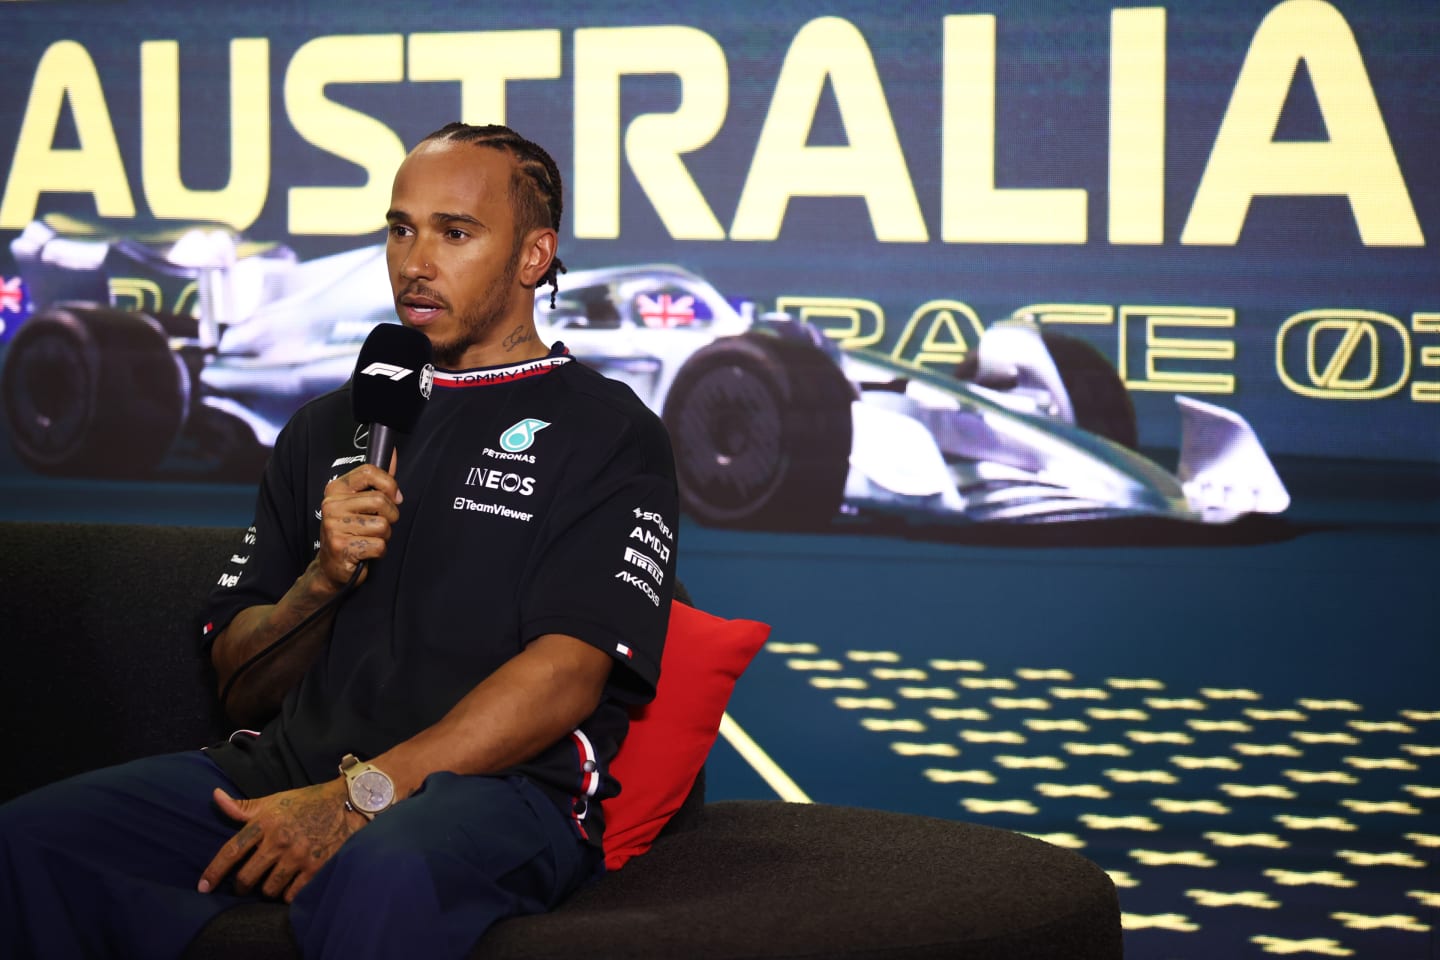 MELBOURNE, AUSTRALIA - APRIL 01: Third placed qualifier Lewis Hamilton of Great Britain and Mercedes attends the press conference after qualifying ahead of the F1 Grand Prix of Australia at Albert Park Grand Prix Circuit on April 01, 2023 in Melbourne, Australia. (Photo by Robert Cianflone/Getty Images)